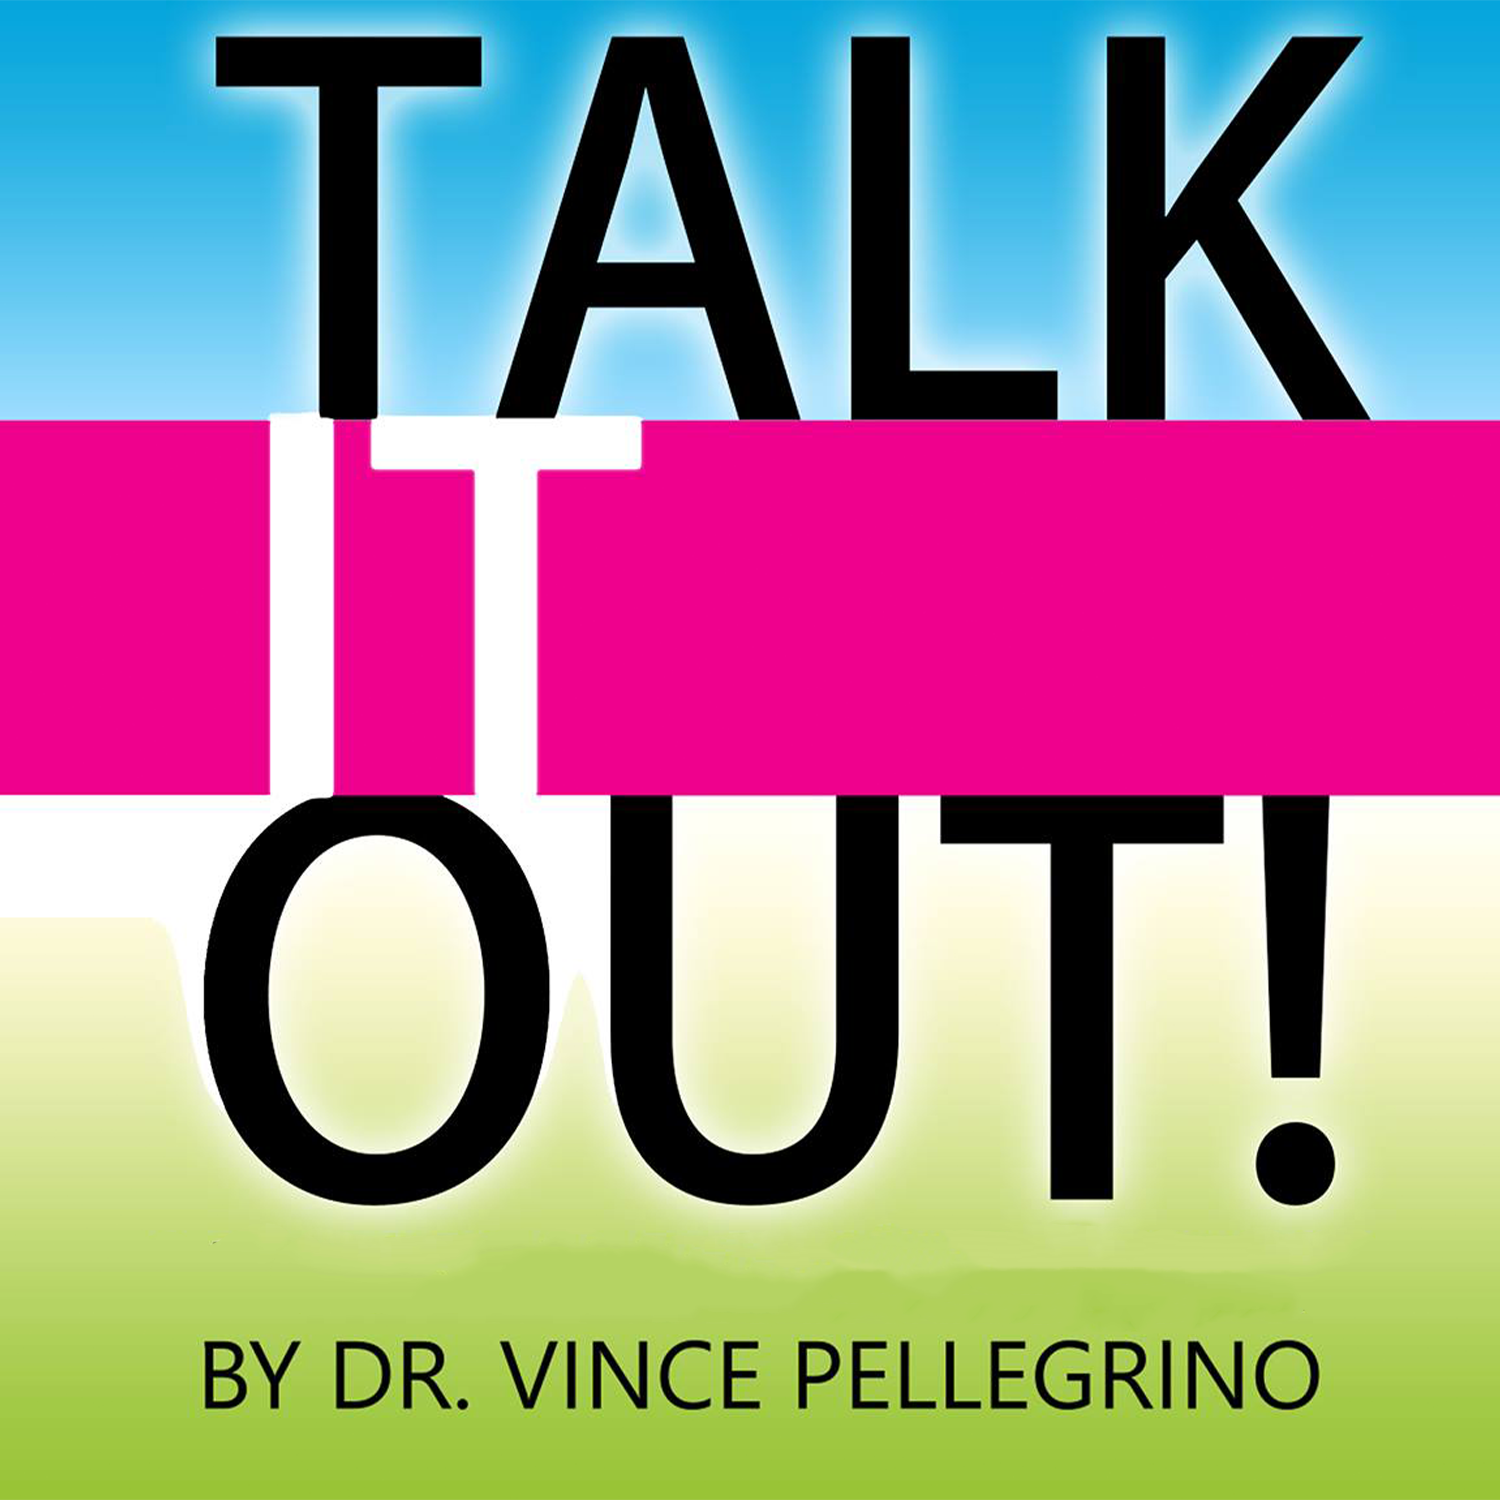 Talk It Out Podcast